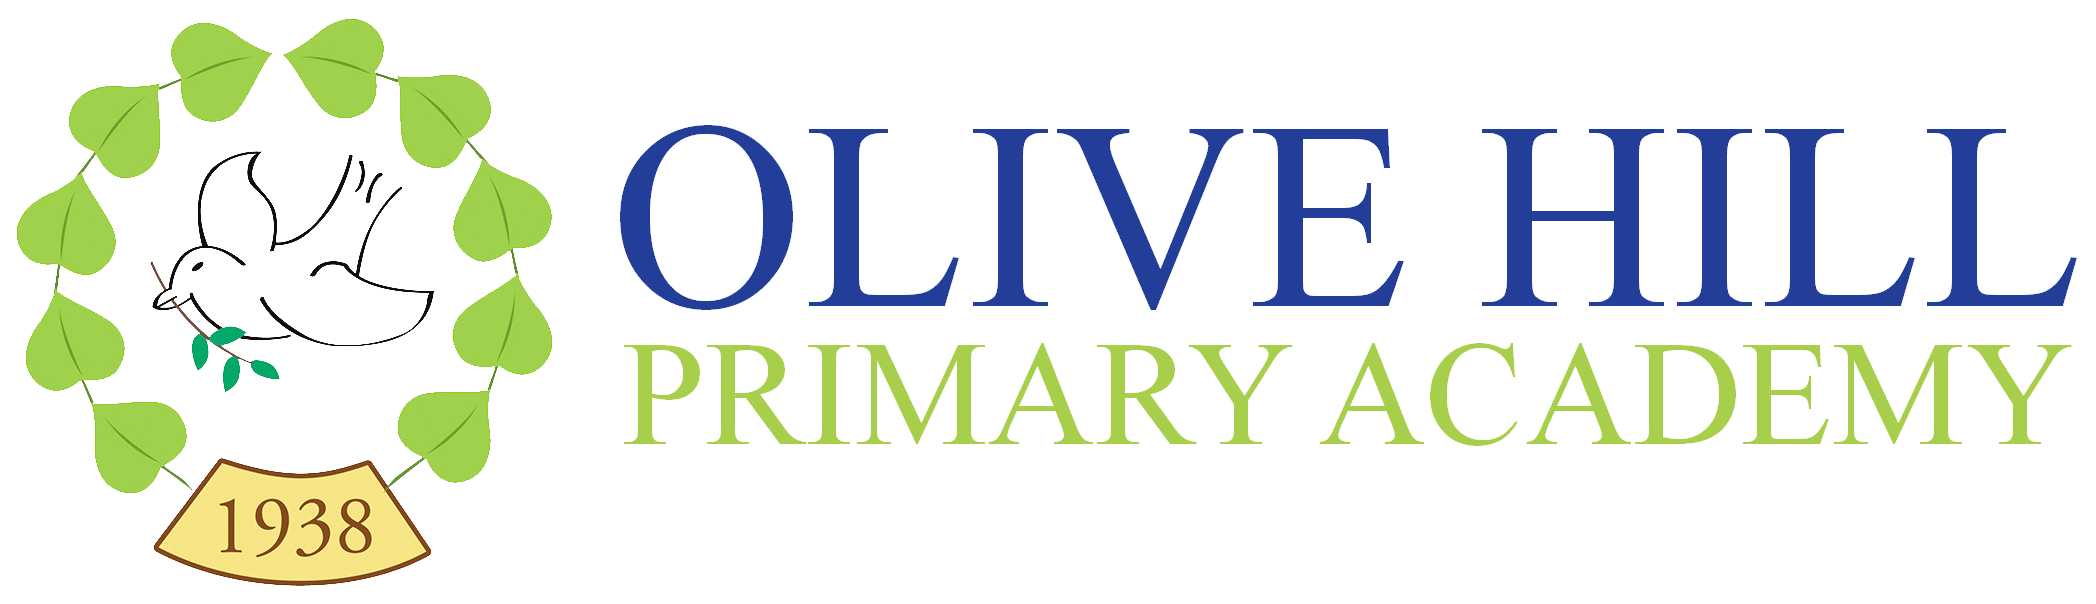 Olive Hill Primary Academy